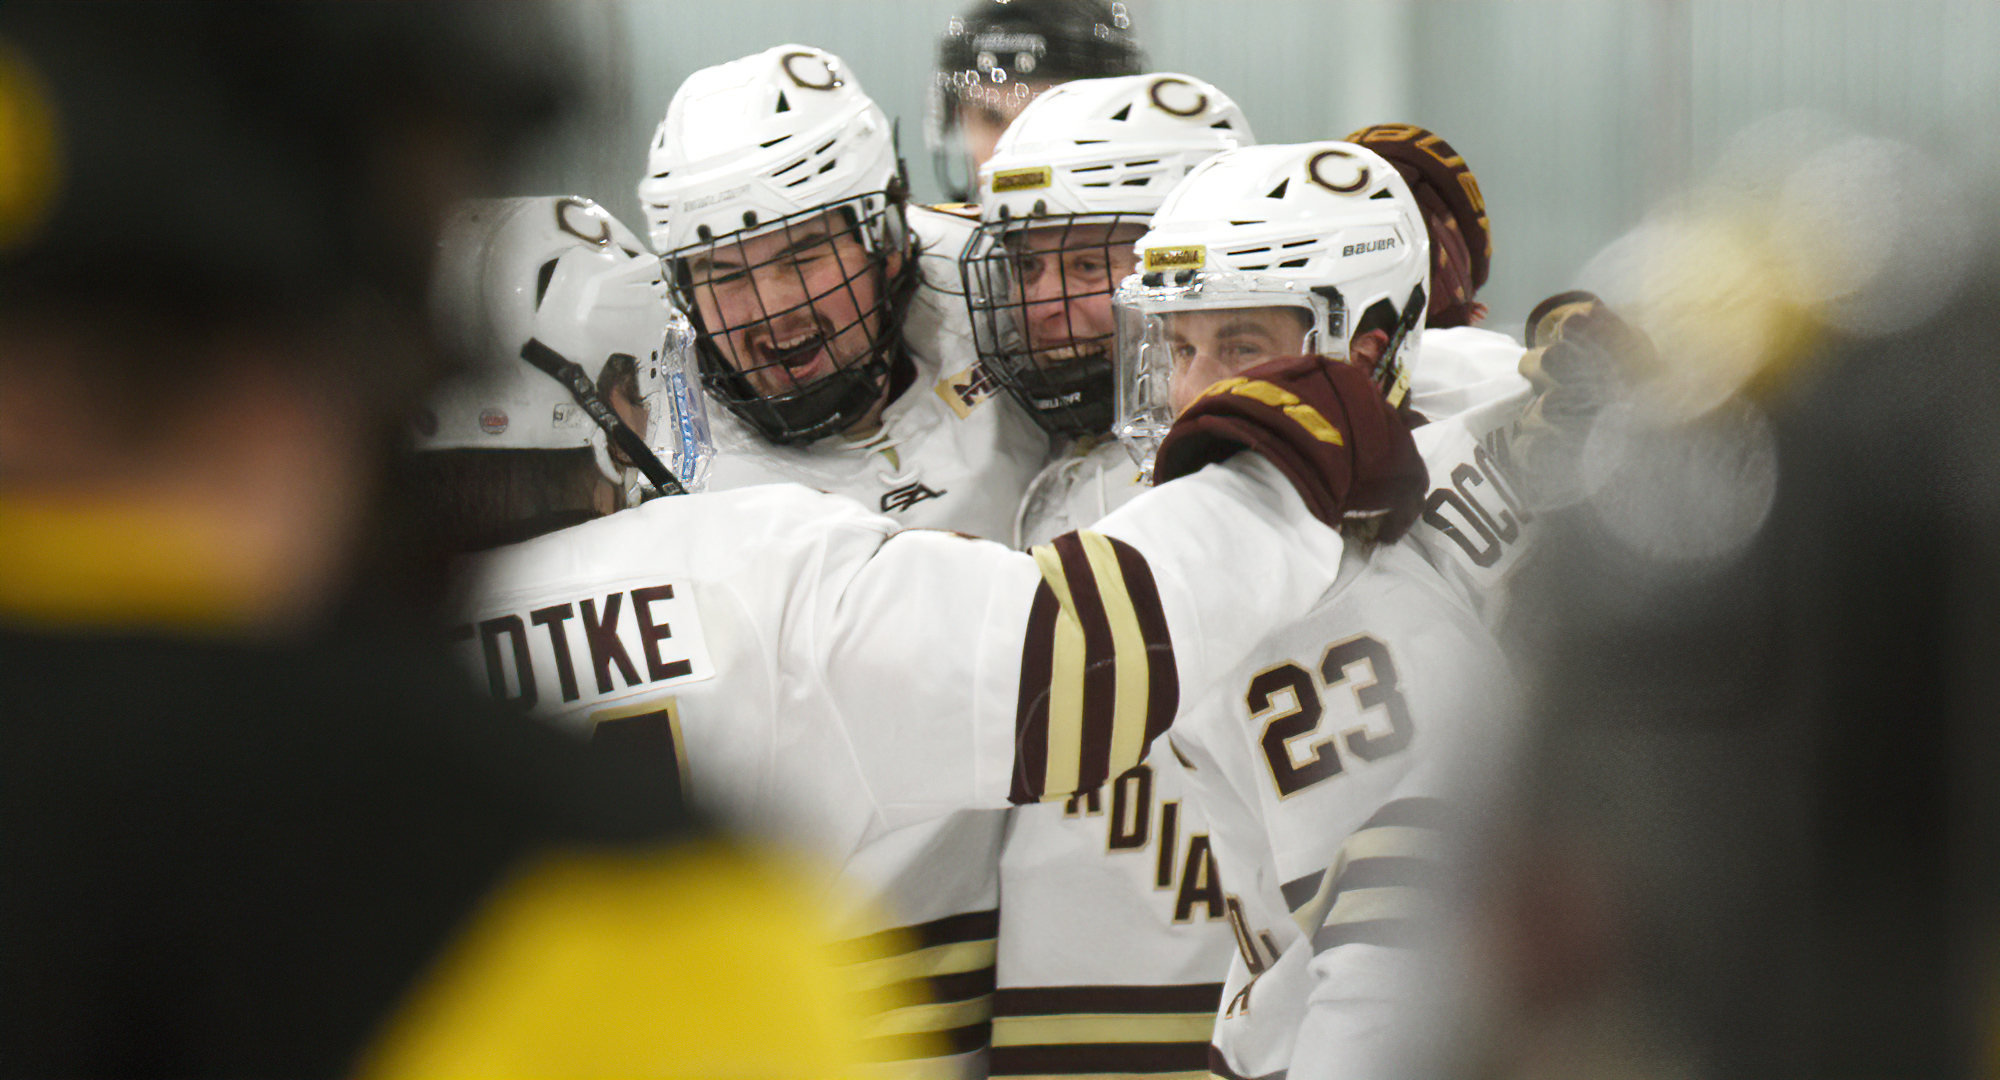 The Cobbers celebrate the first caeeer goal from Garrett Sandberg in the second period of their series opener with Gustavus.